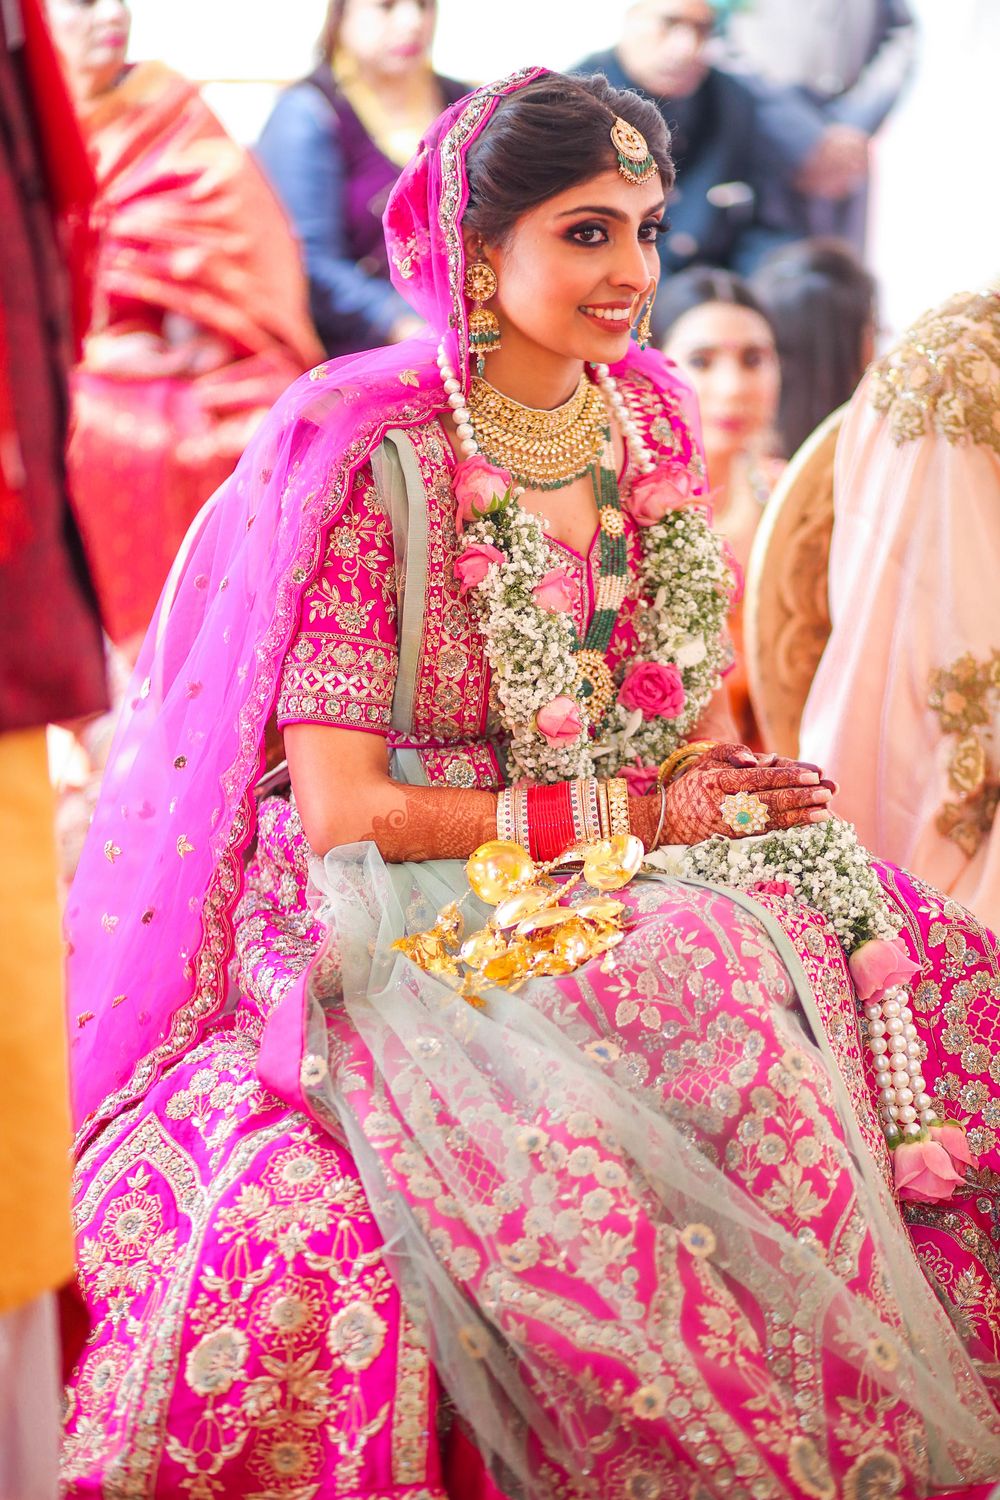 Photo of Bride dressed in a Fuschia pink lehenga on her wedding day.